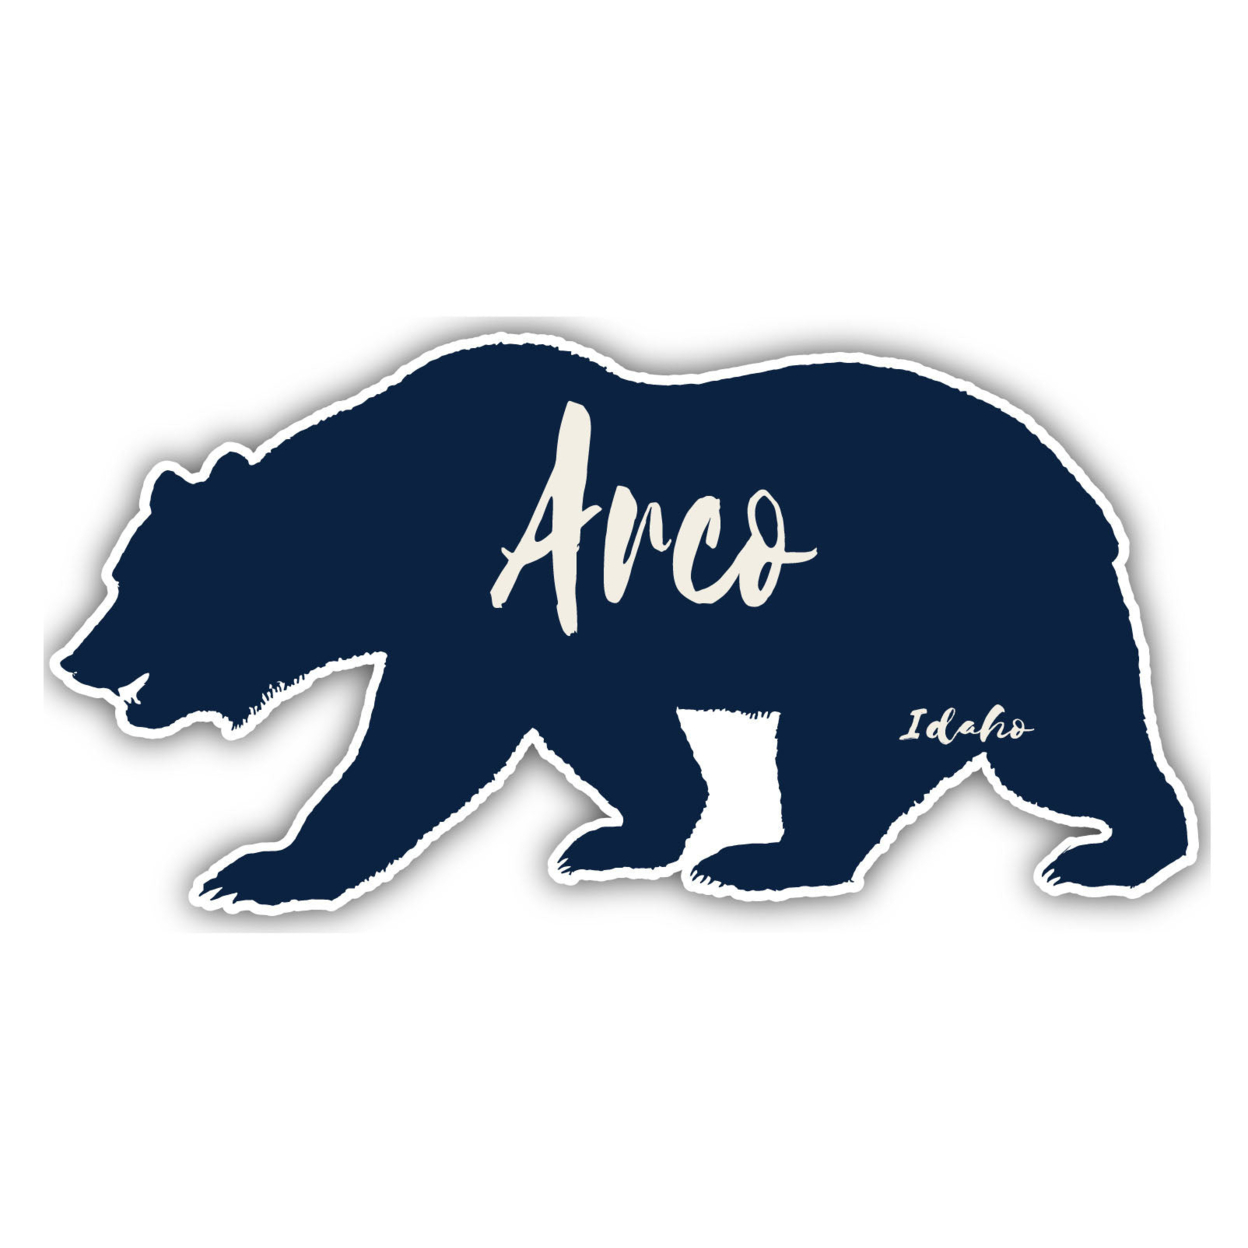 Arco Idaho Souvenir Decorative Stickers (Choose Theme And Size) - 4-Pack, 8-Inch, Bear